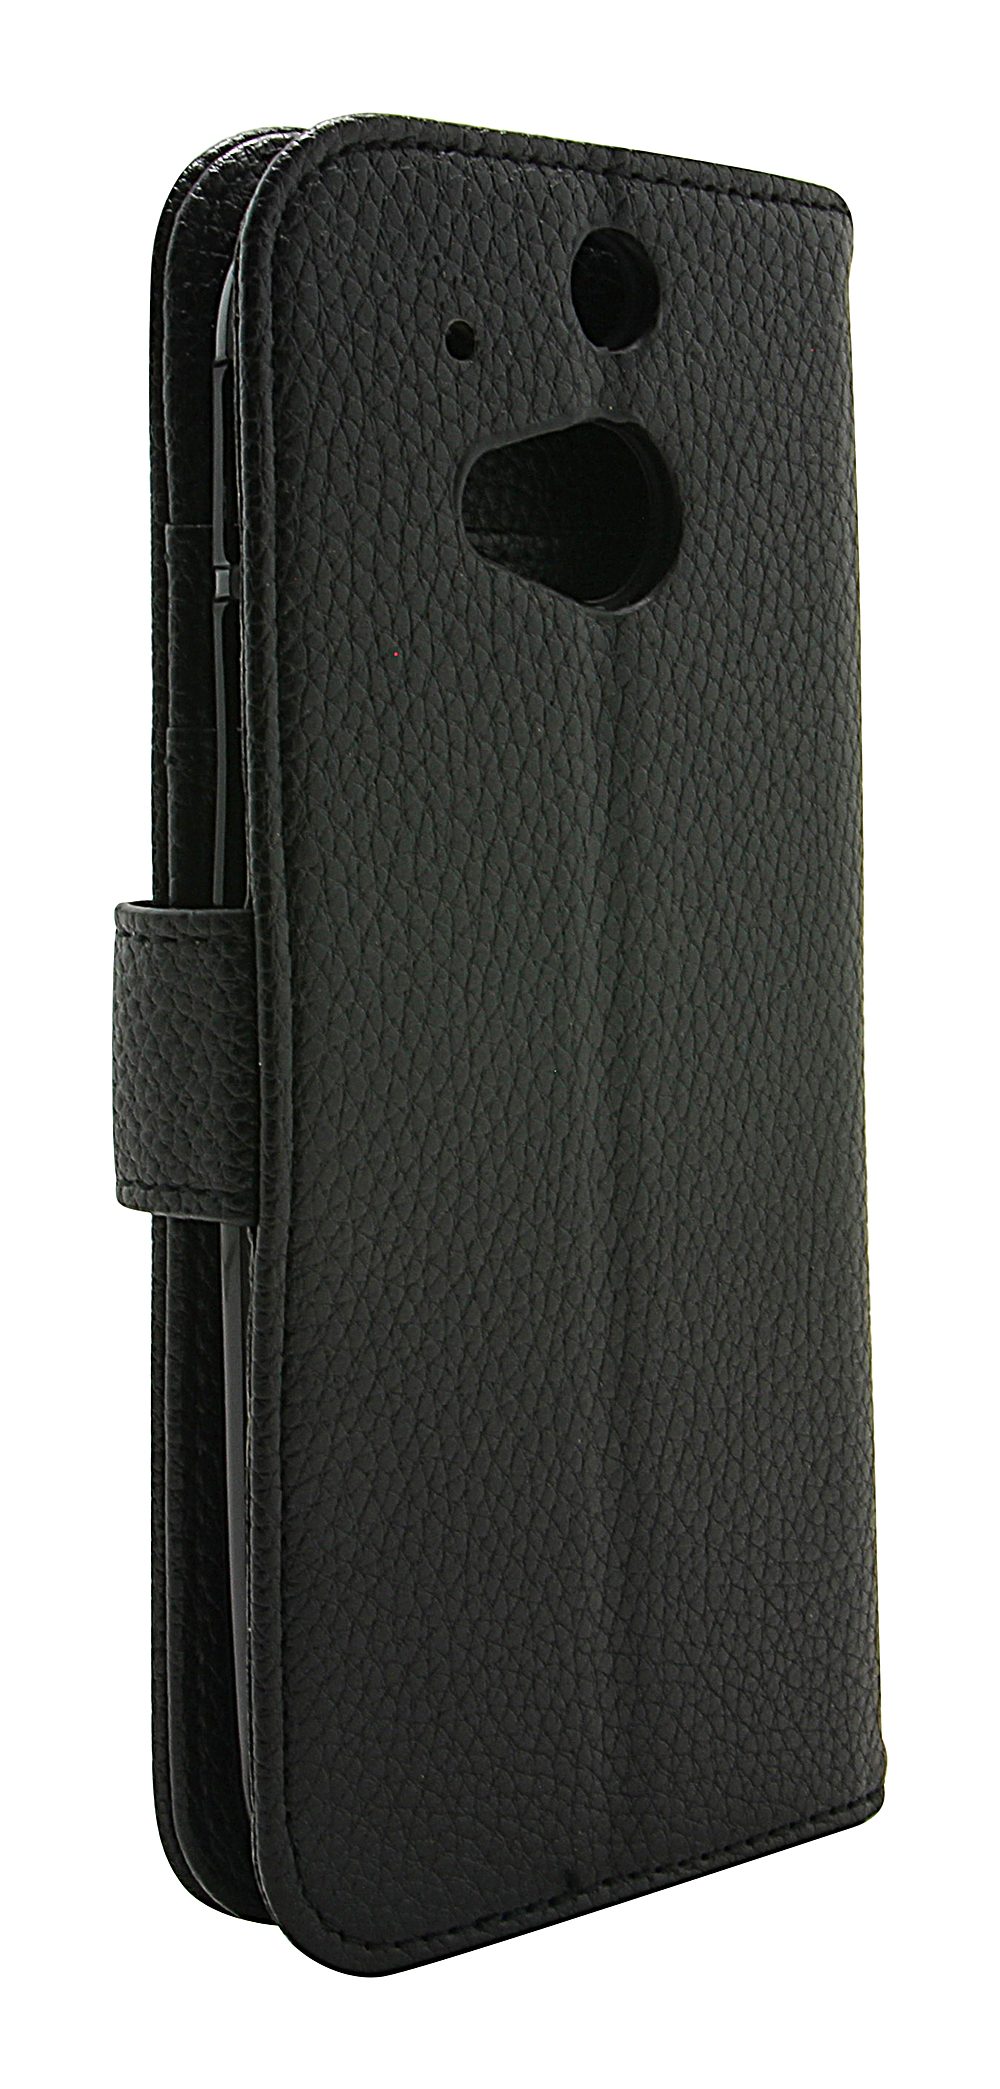 New Standcase Wallet HTC One (M8)